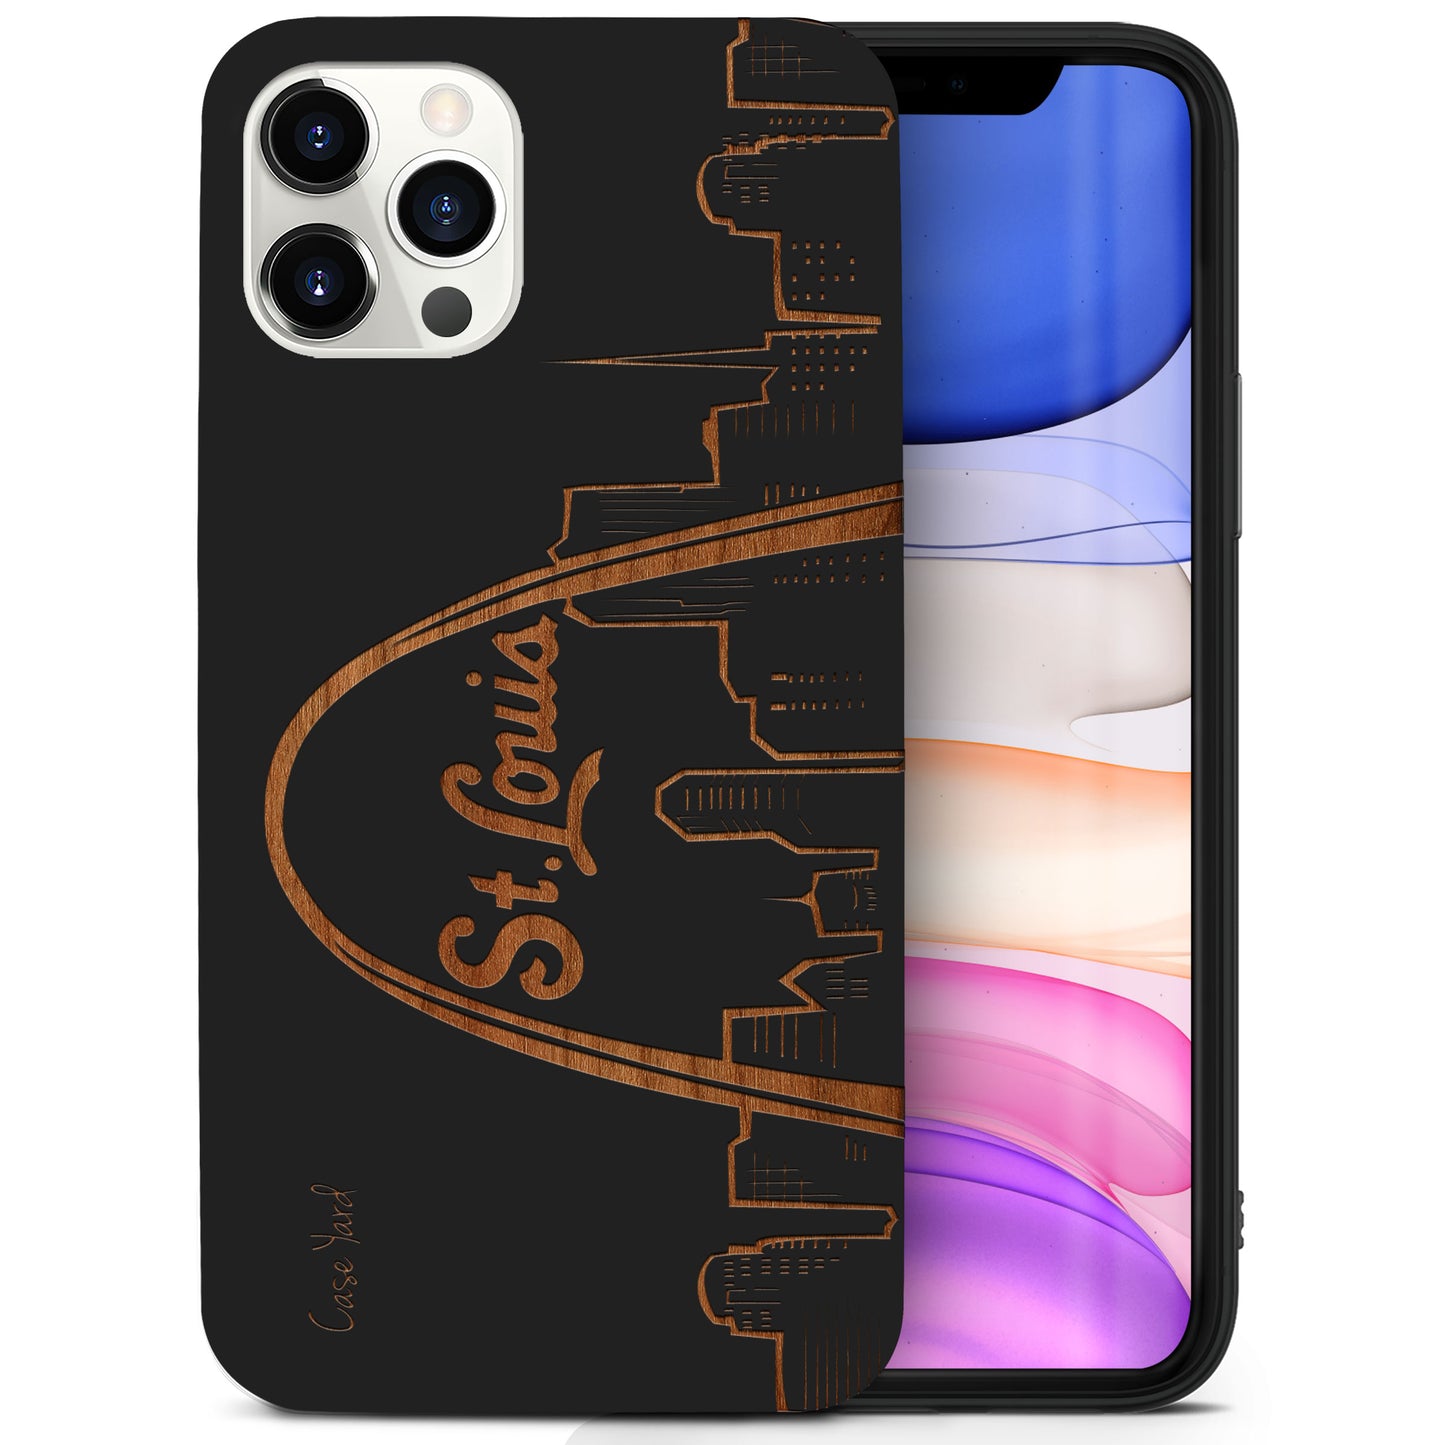 Wooden Cell Phone Case Cover, Laser Engraved case for iPhone & Samsung phone St. Louis Skyline Design